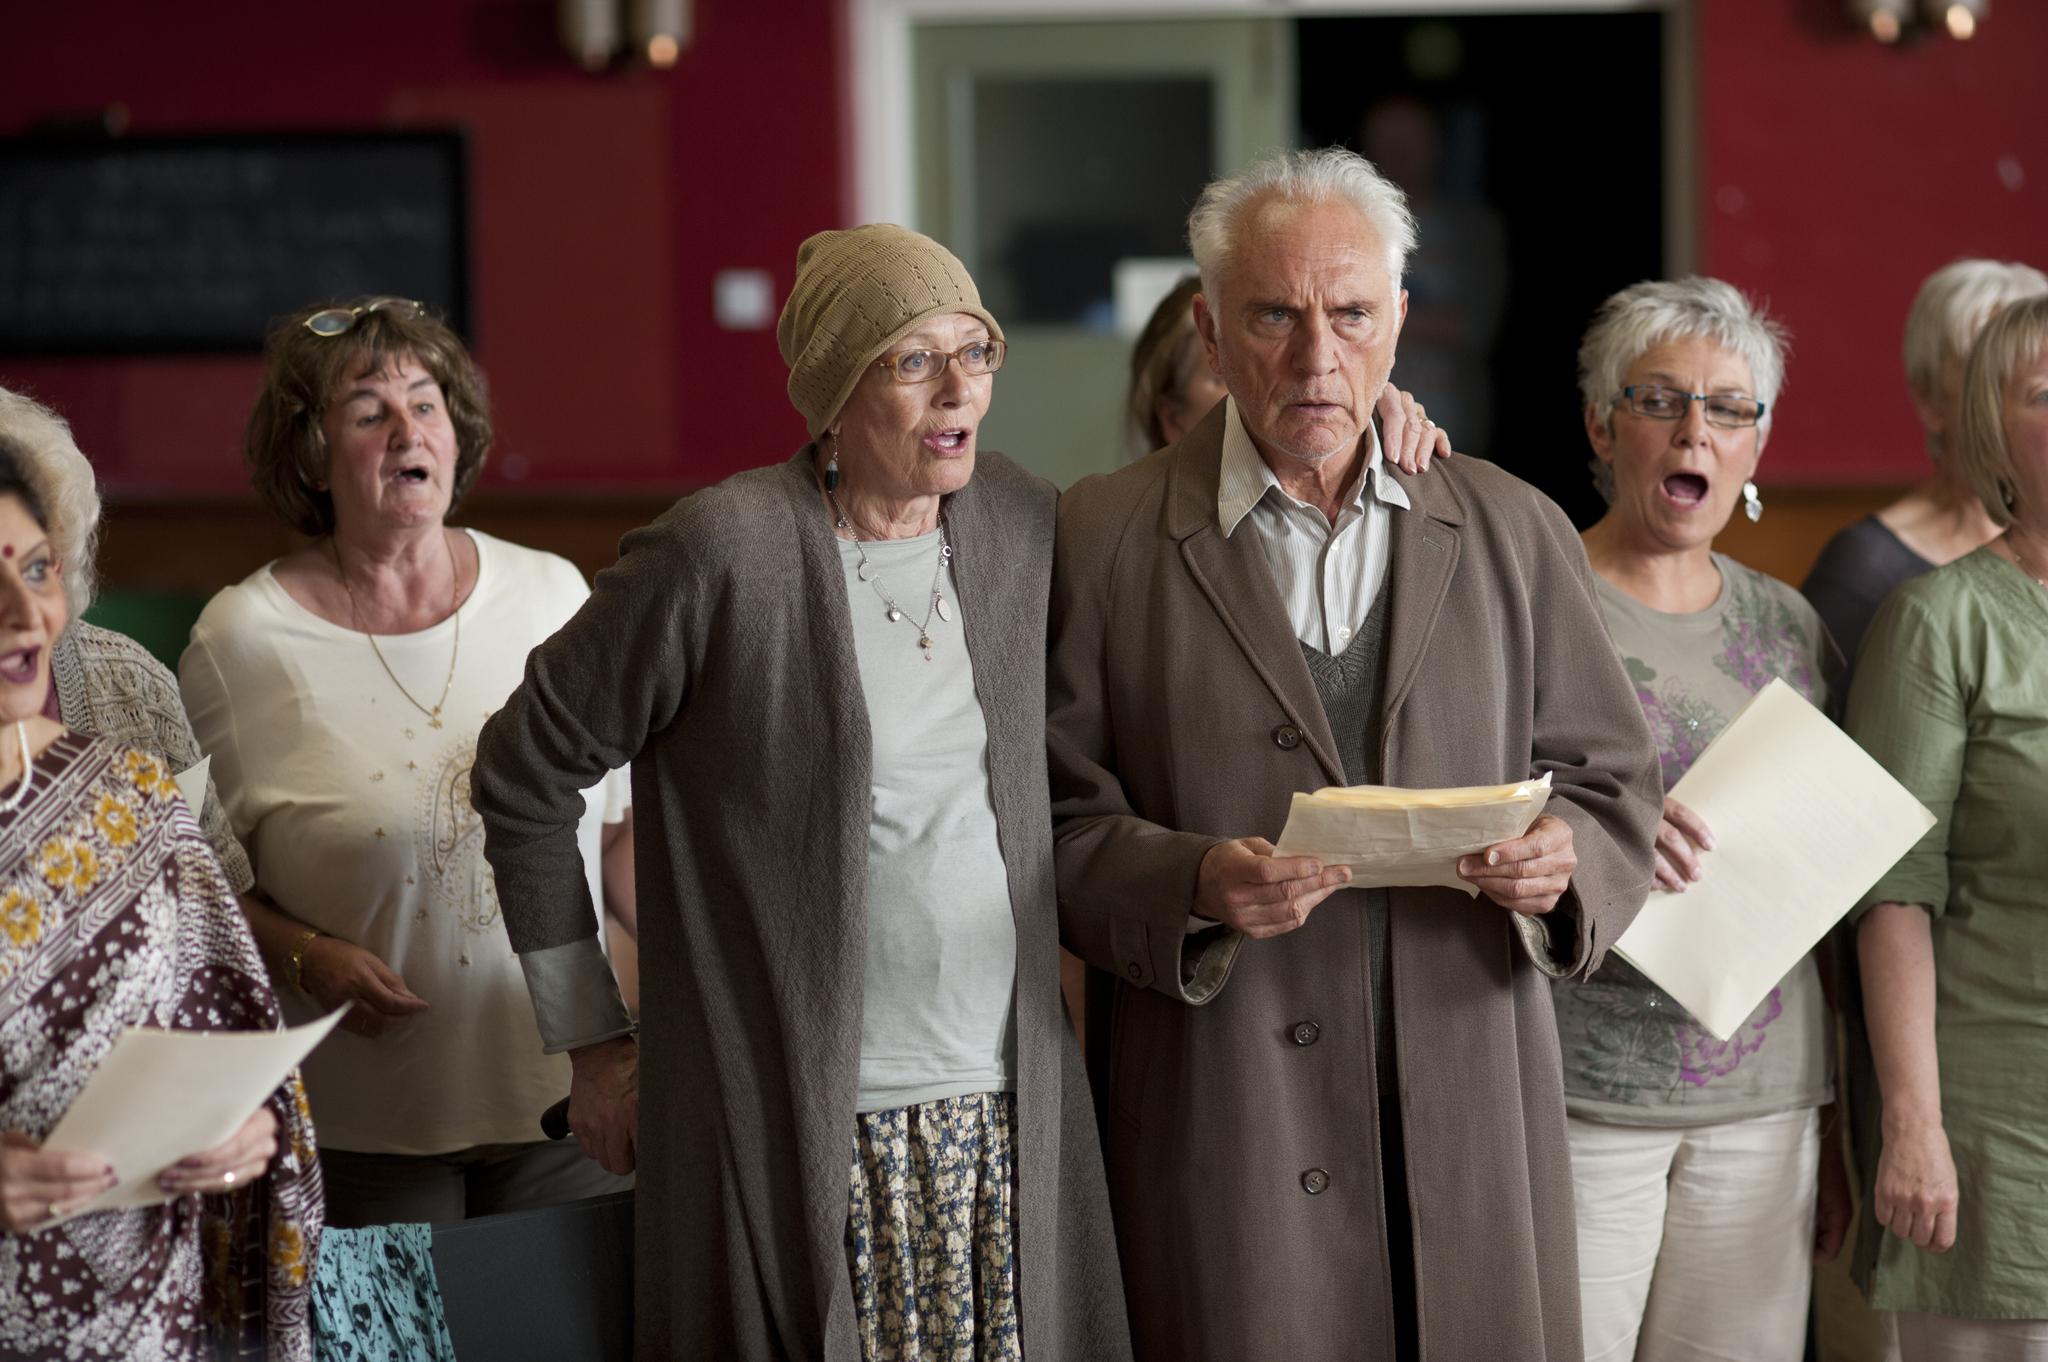 still-of-vanessa-redgrave-and-terence-stamp-in-unfinished-song-_2012_-large-picture.jpg